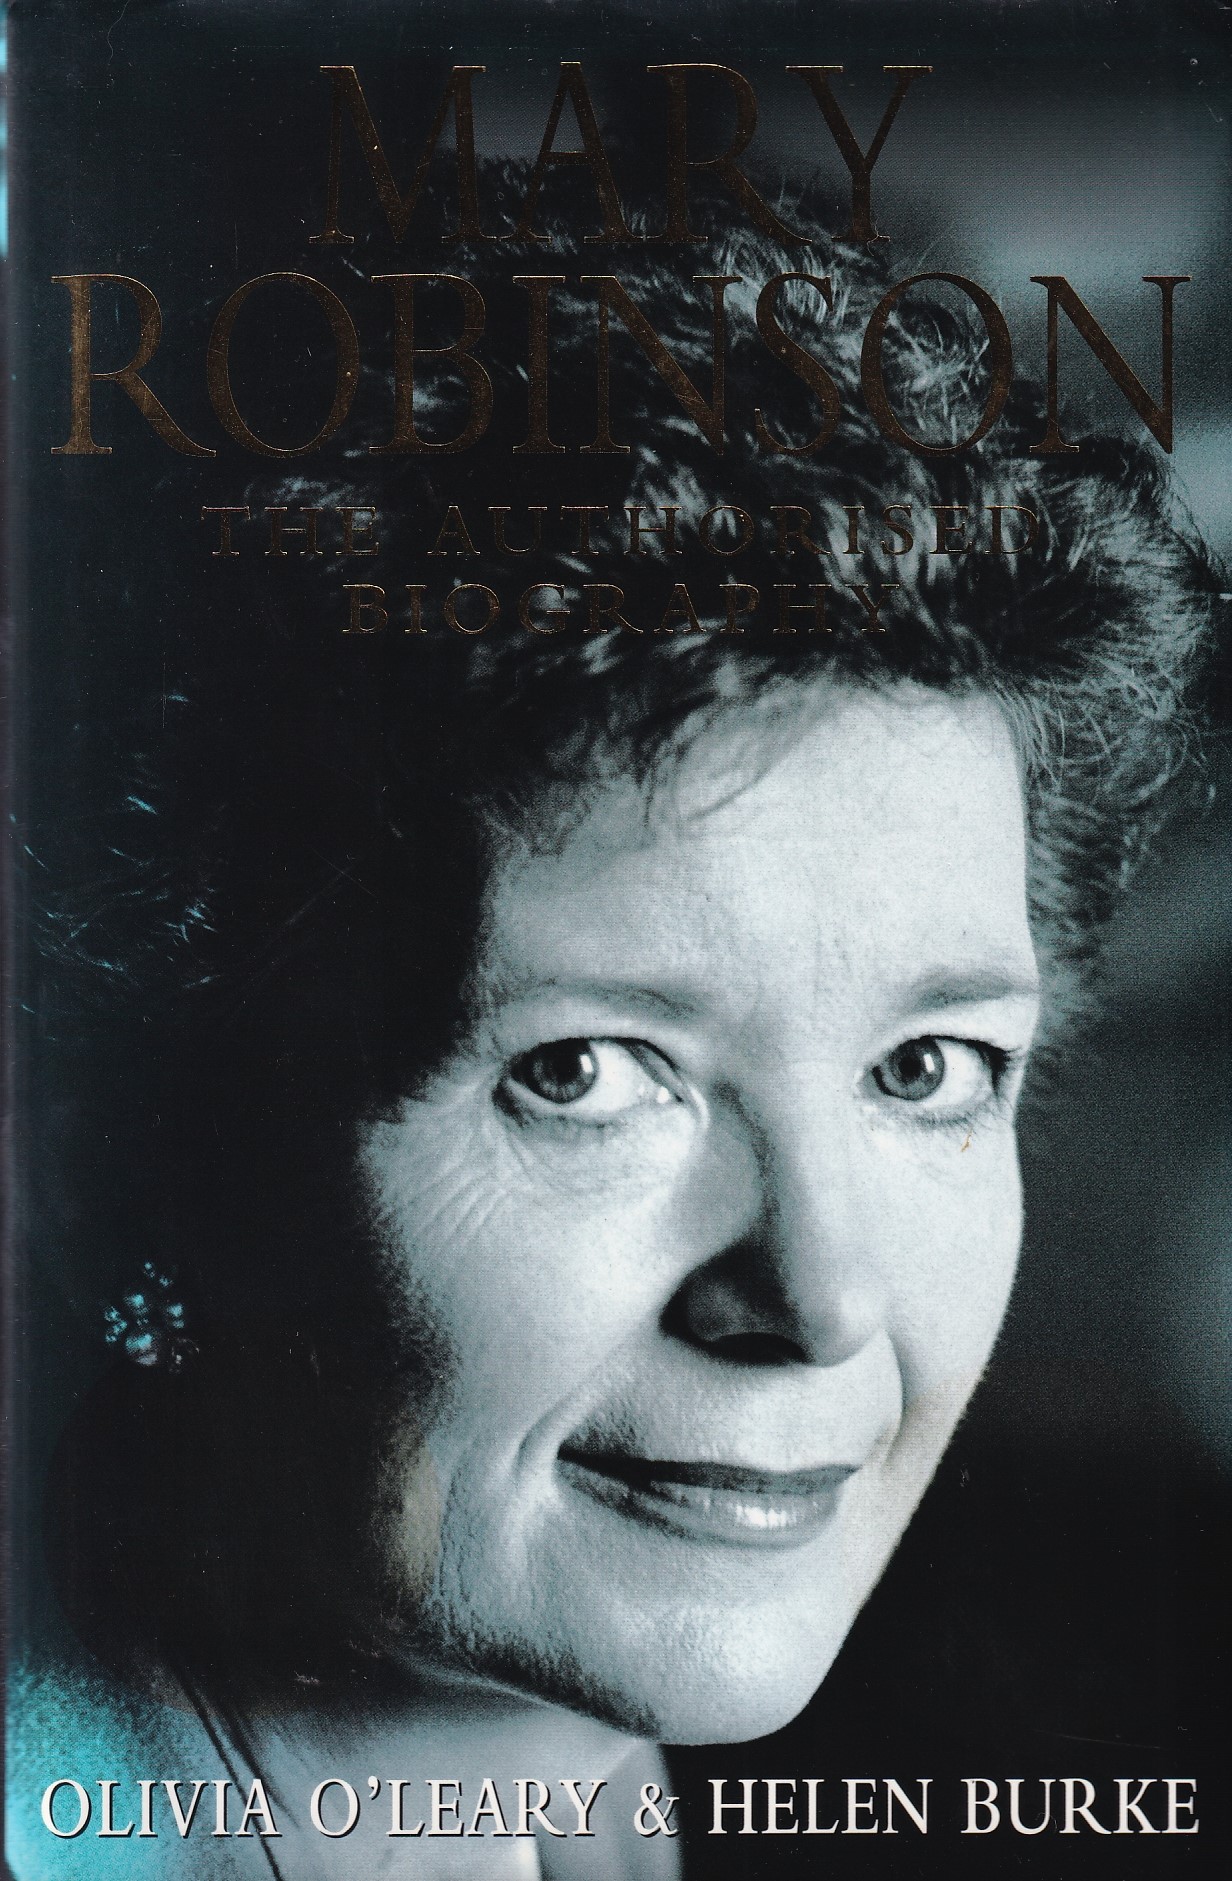 Mary Robinson: The Authorised Autobiography [SIGNED] by Olivia O'Leary & Helen Burke